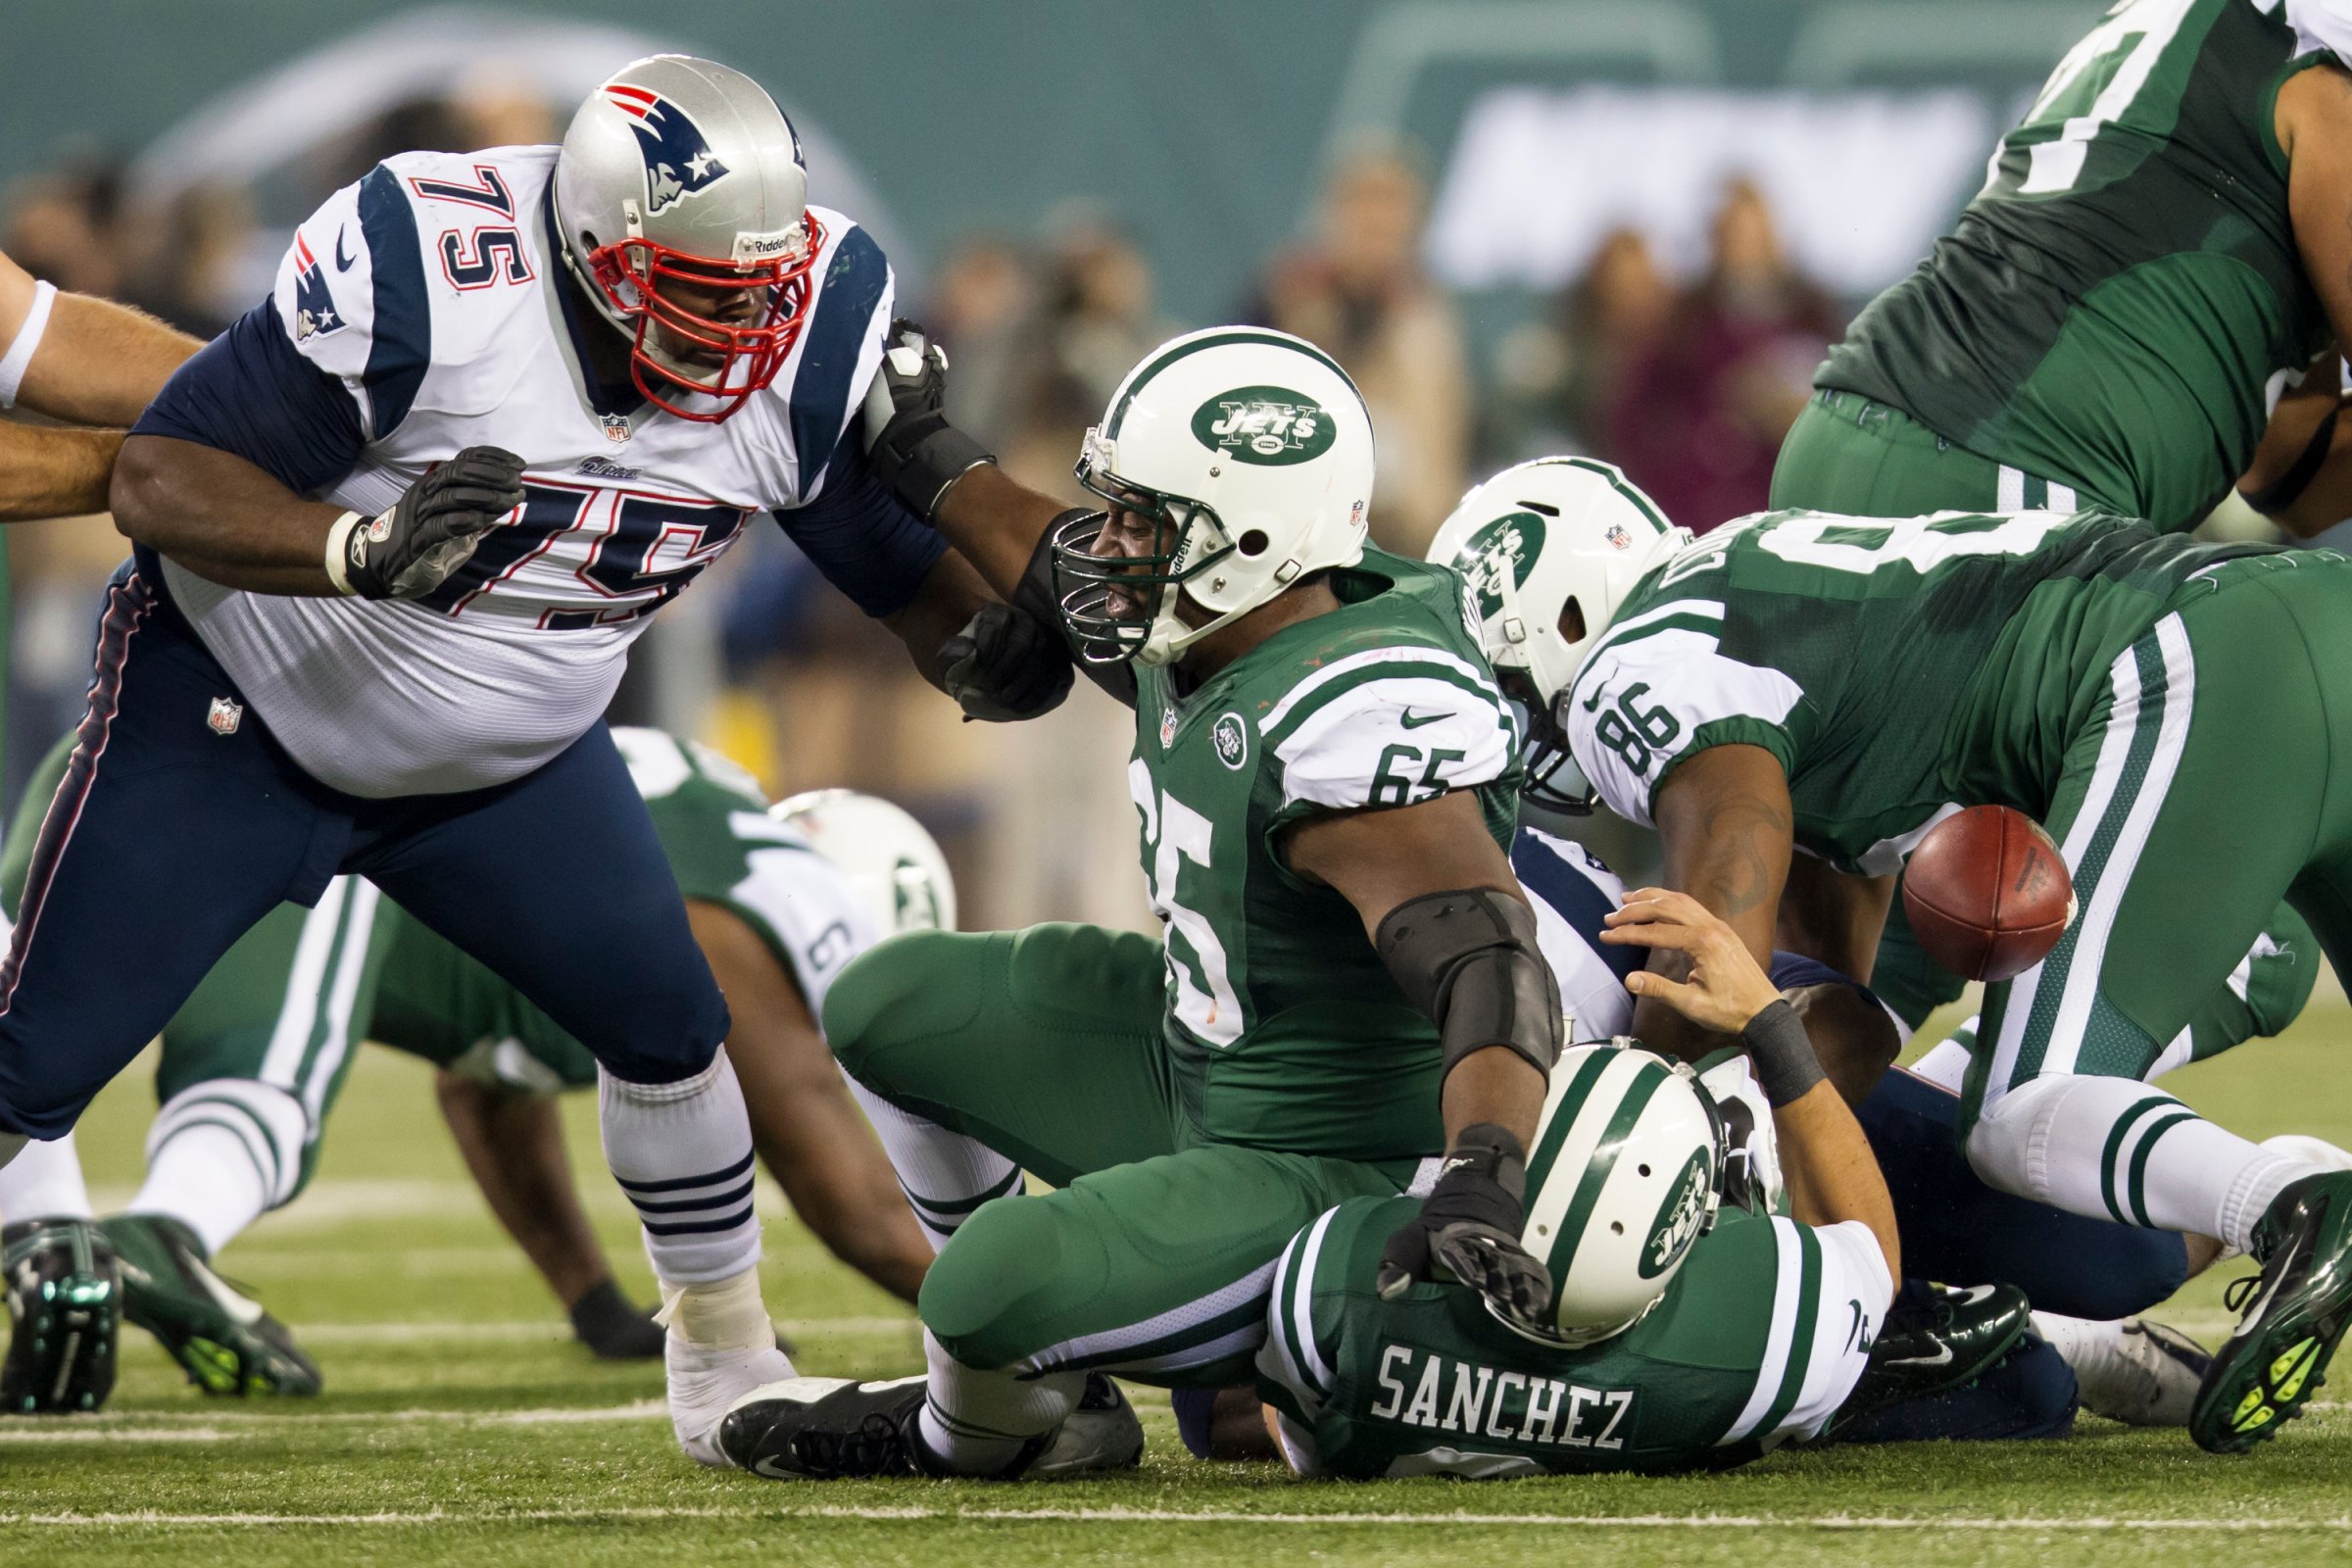 Patriots defensive tackle Vince Wilfork (75) pushes back New York Jets guard Brandon Moore (65) into quarterback Mark Sanchez (6) causing Sanchez to fumble the ball during the NFL Thanksgiving Day game between the New England Patriots and the New York Jets at MetLife Stadium in East Rutherford, N.J on Nov. 22, 2012.